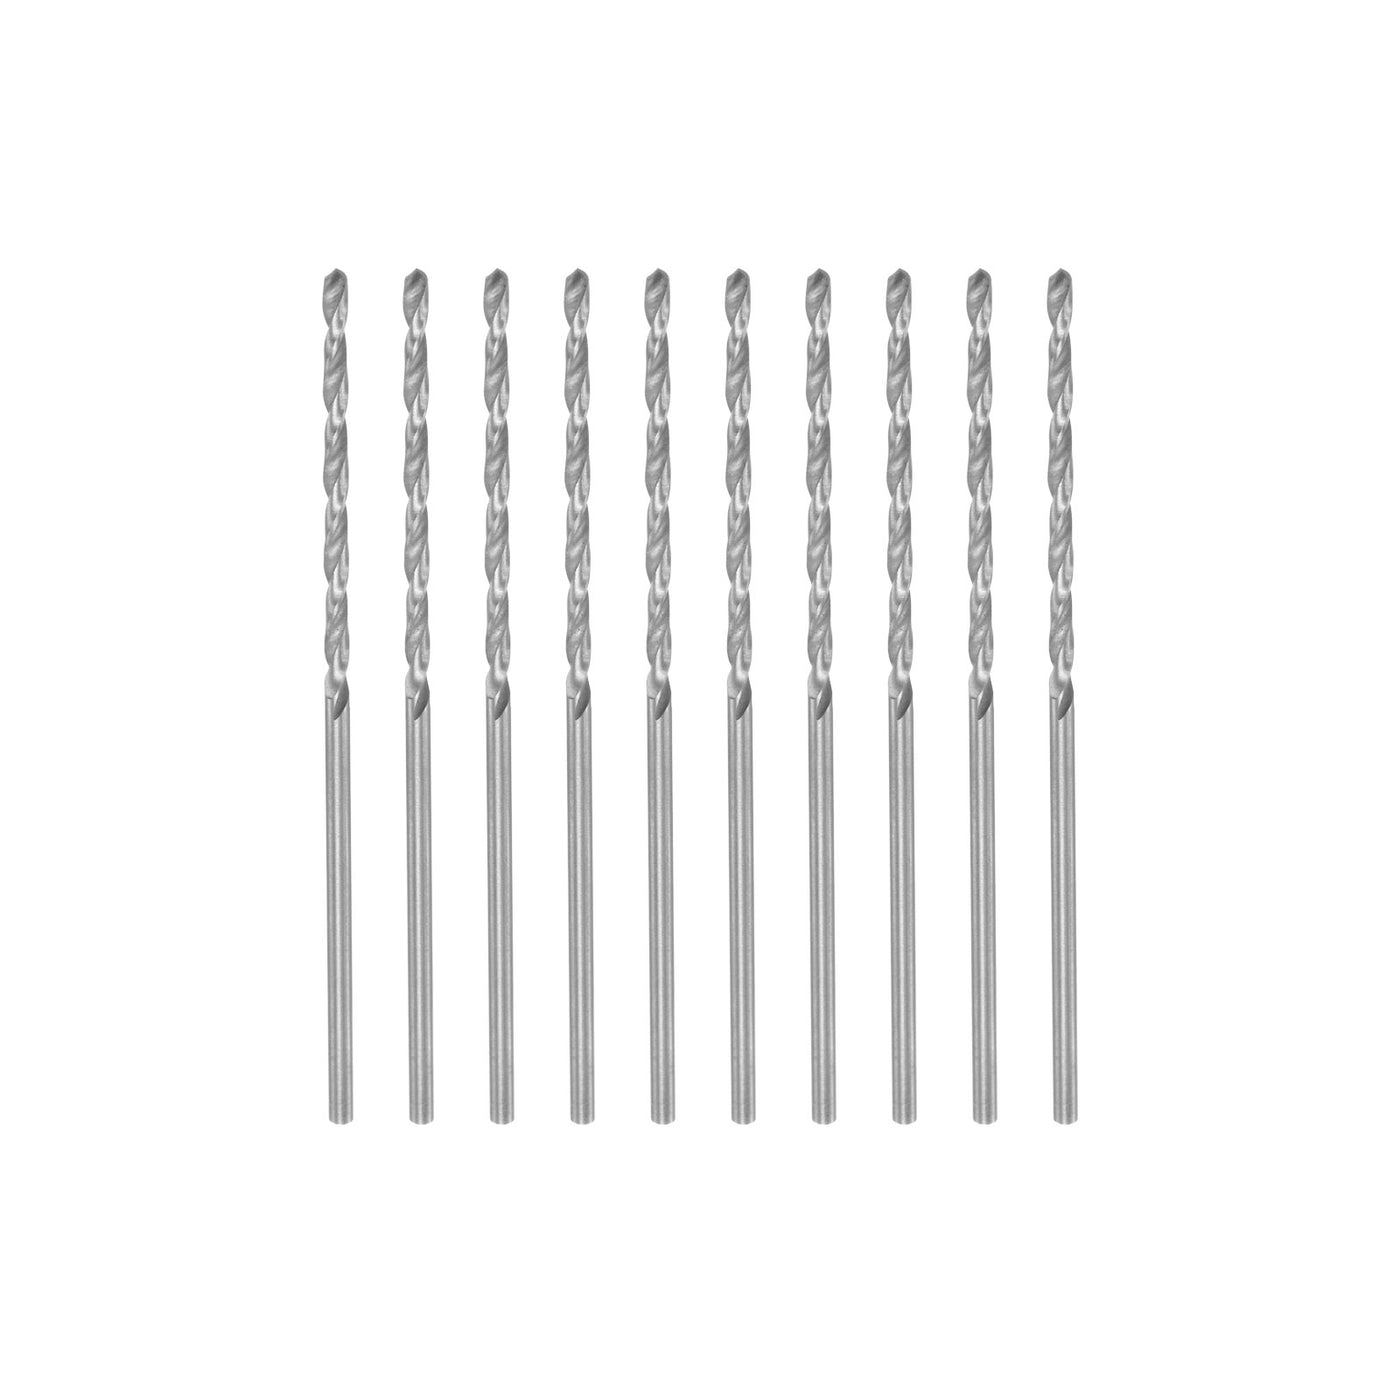 uxcell Uxcell 10 Pcs 1.4mm High Speed Steel Drill Bits, Fully Ground 48mm Length Drill Bit